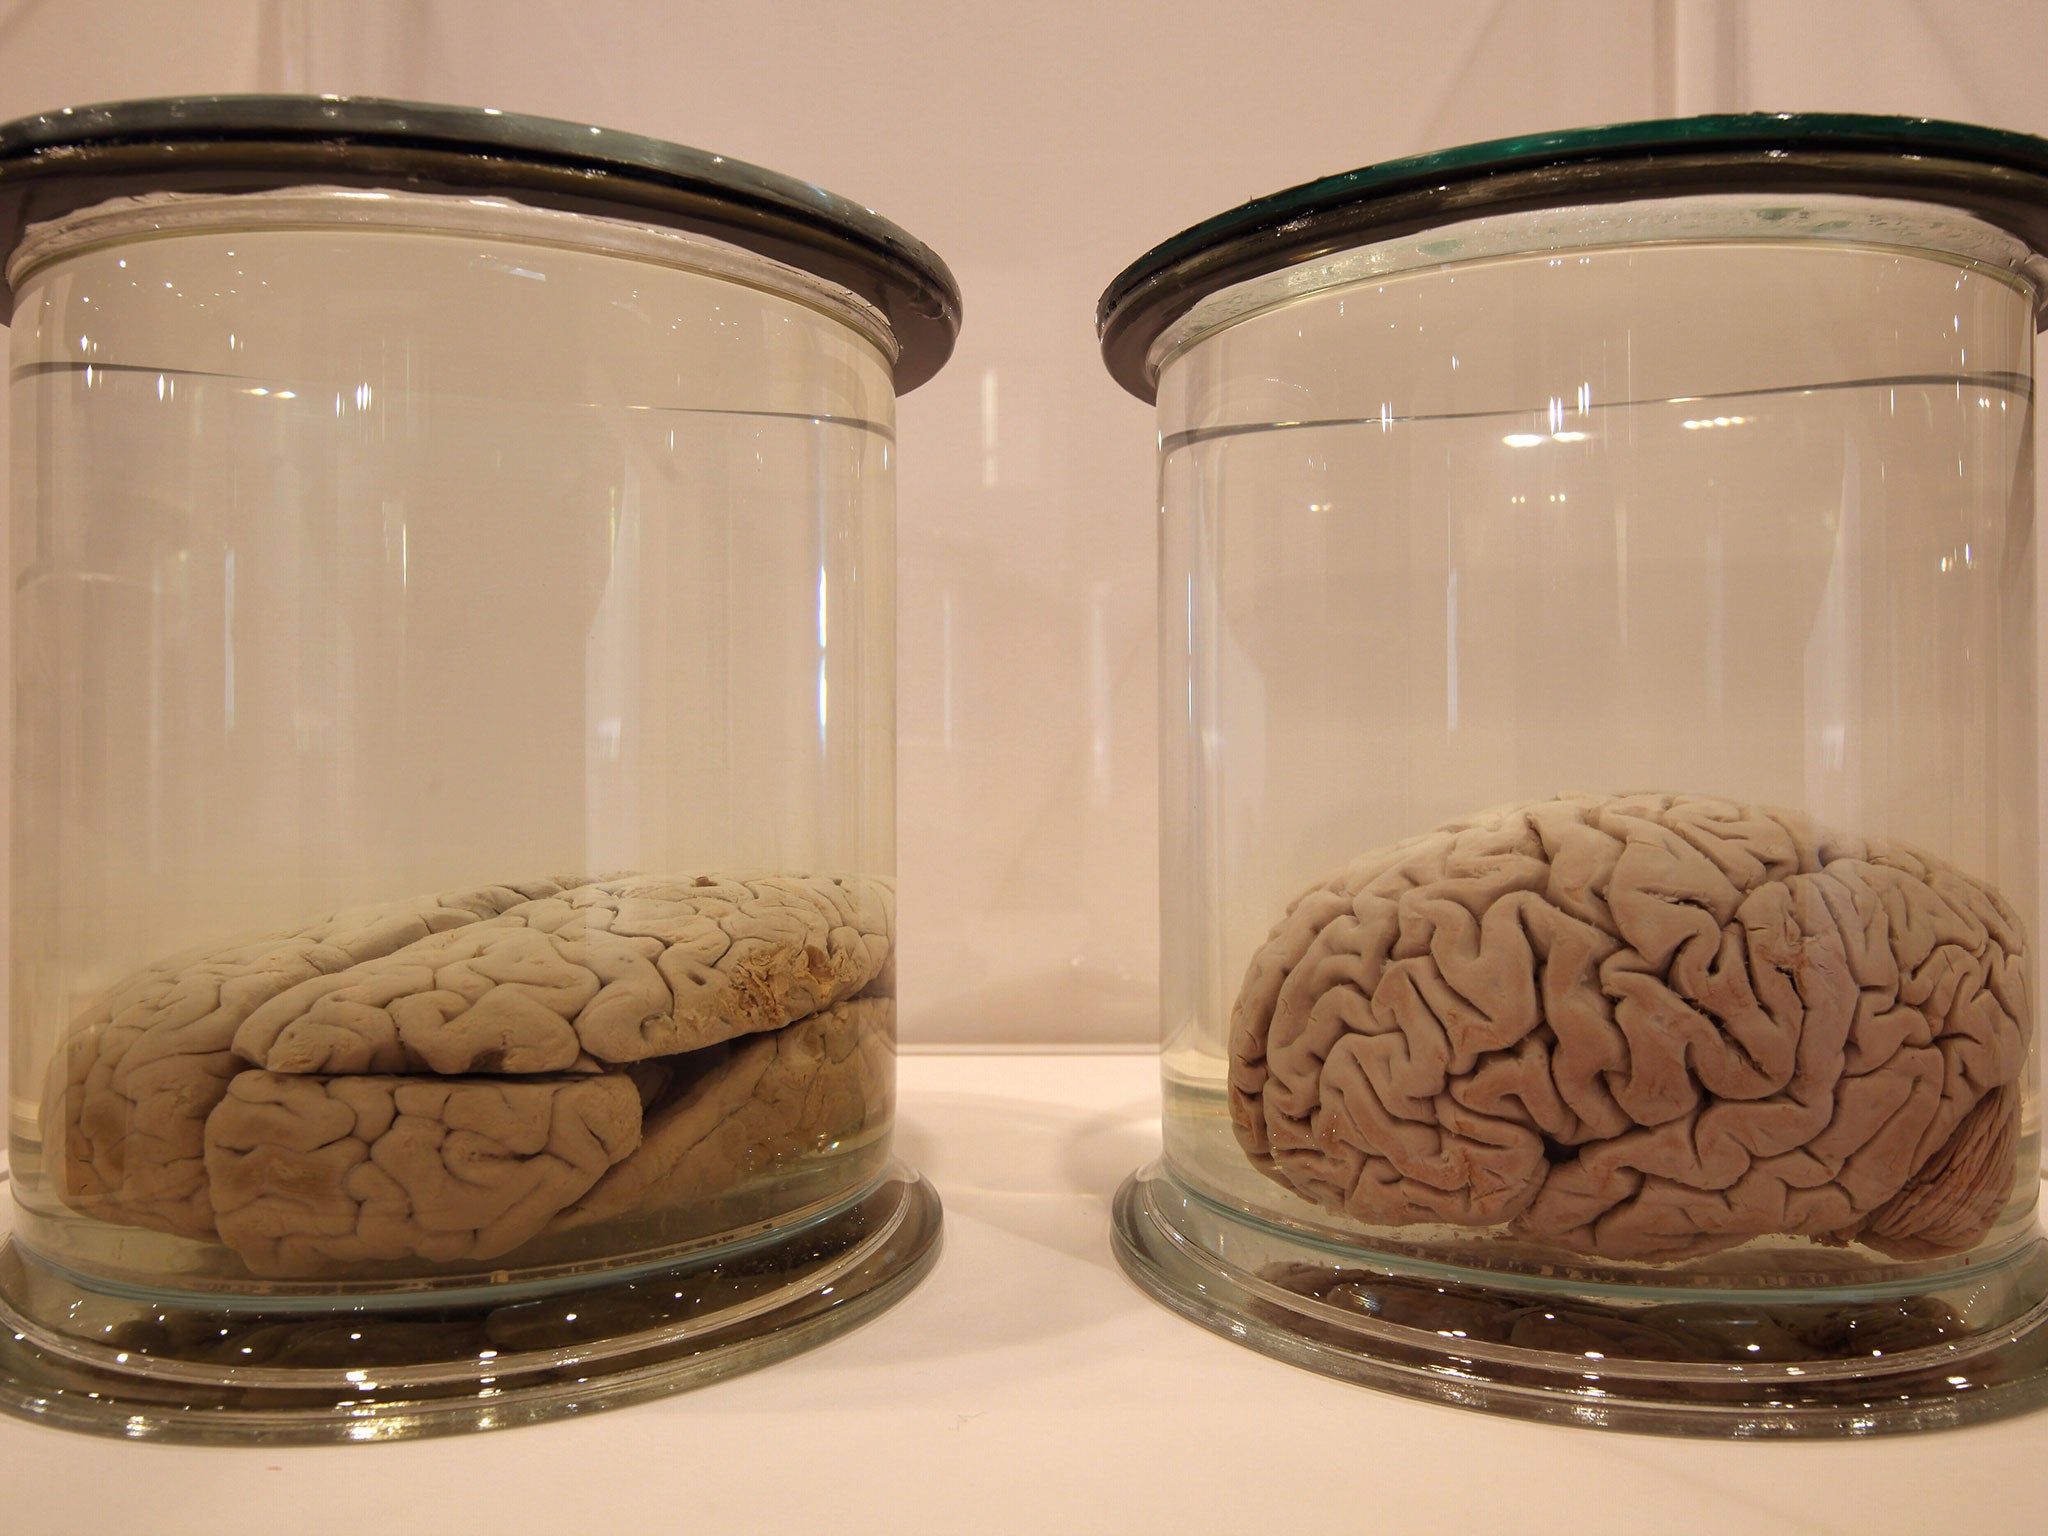 The brains were preserved in jars